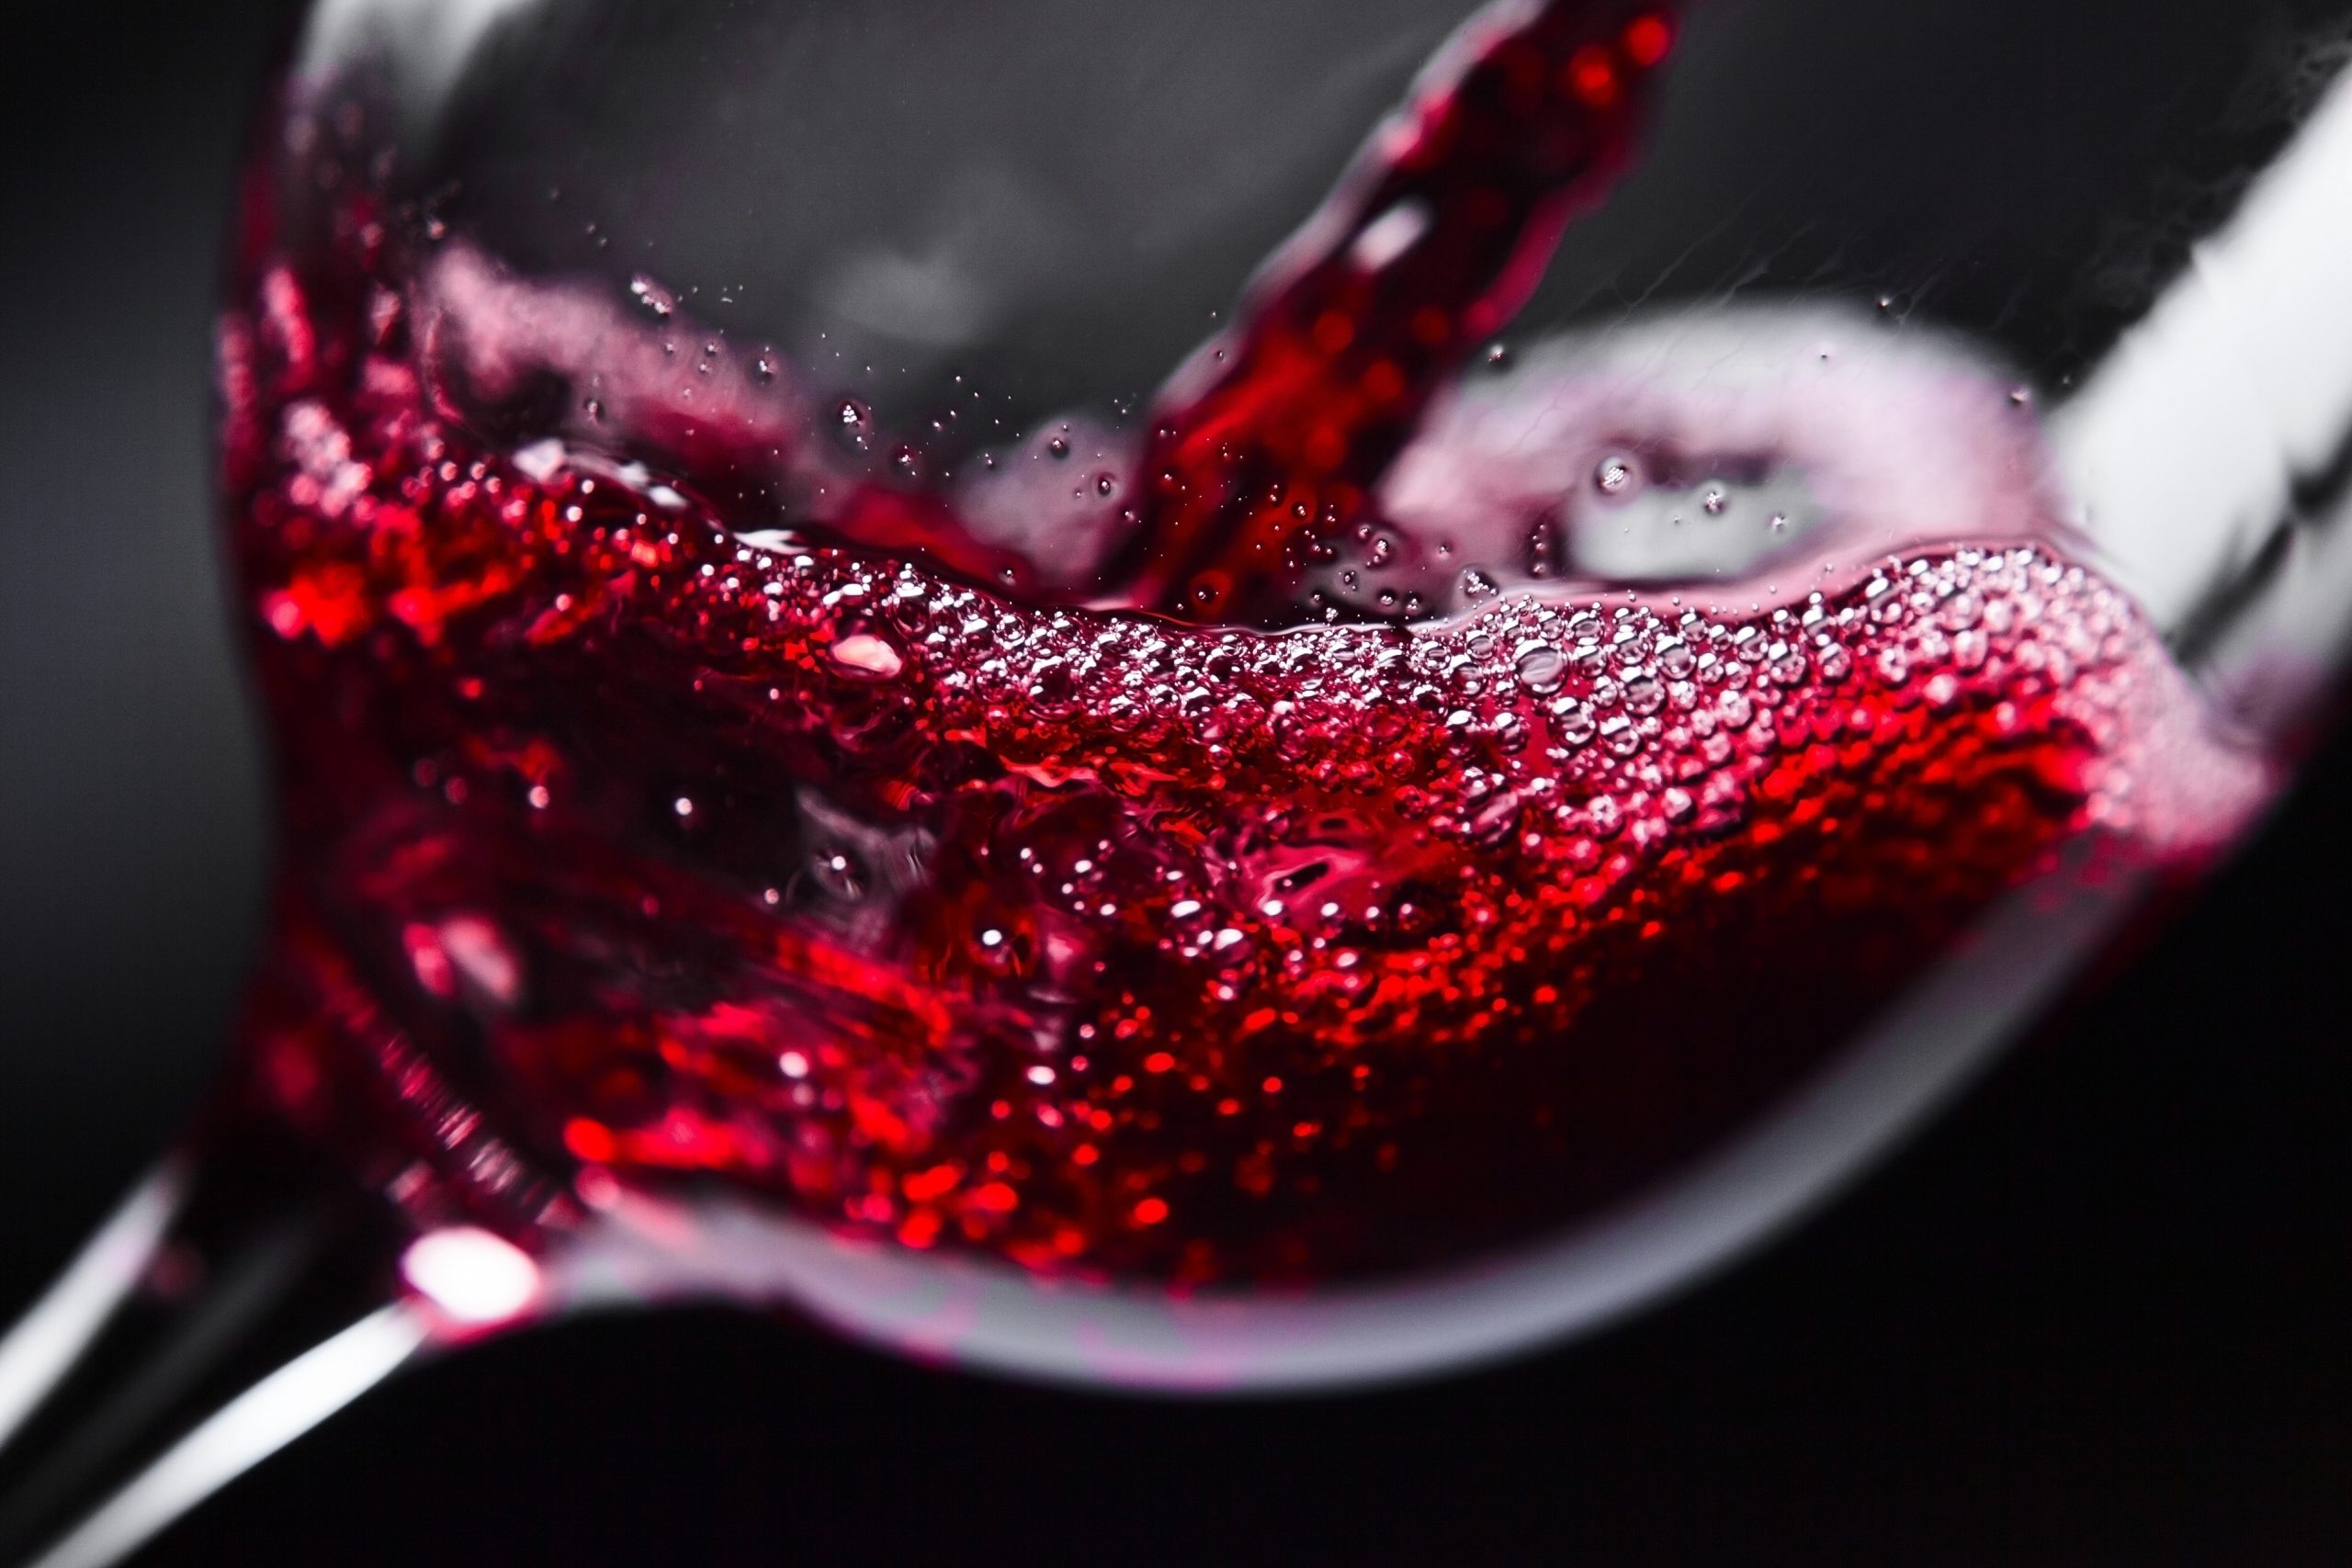 Alcohol-free wine heart benefits - a glass of red wine